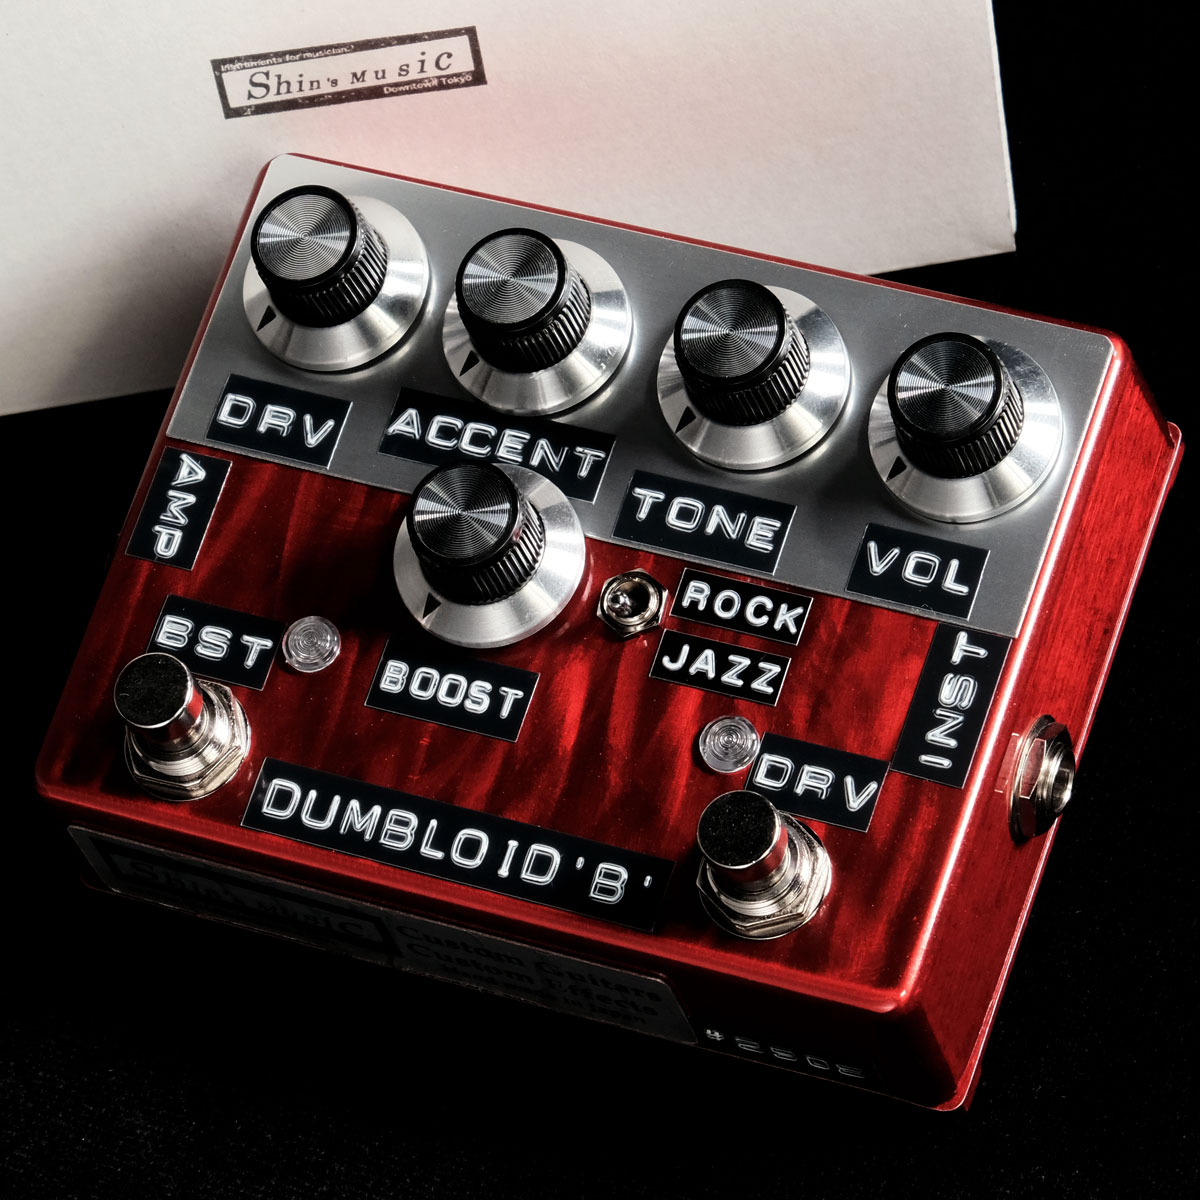 Shin's Music / Dumbloid B Boost Special Red Flame